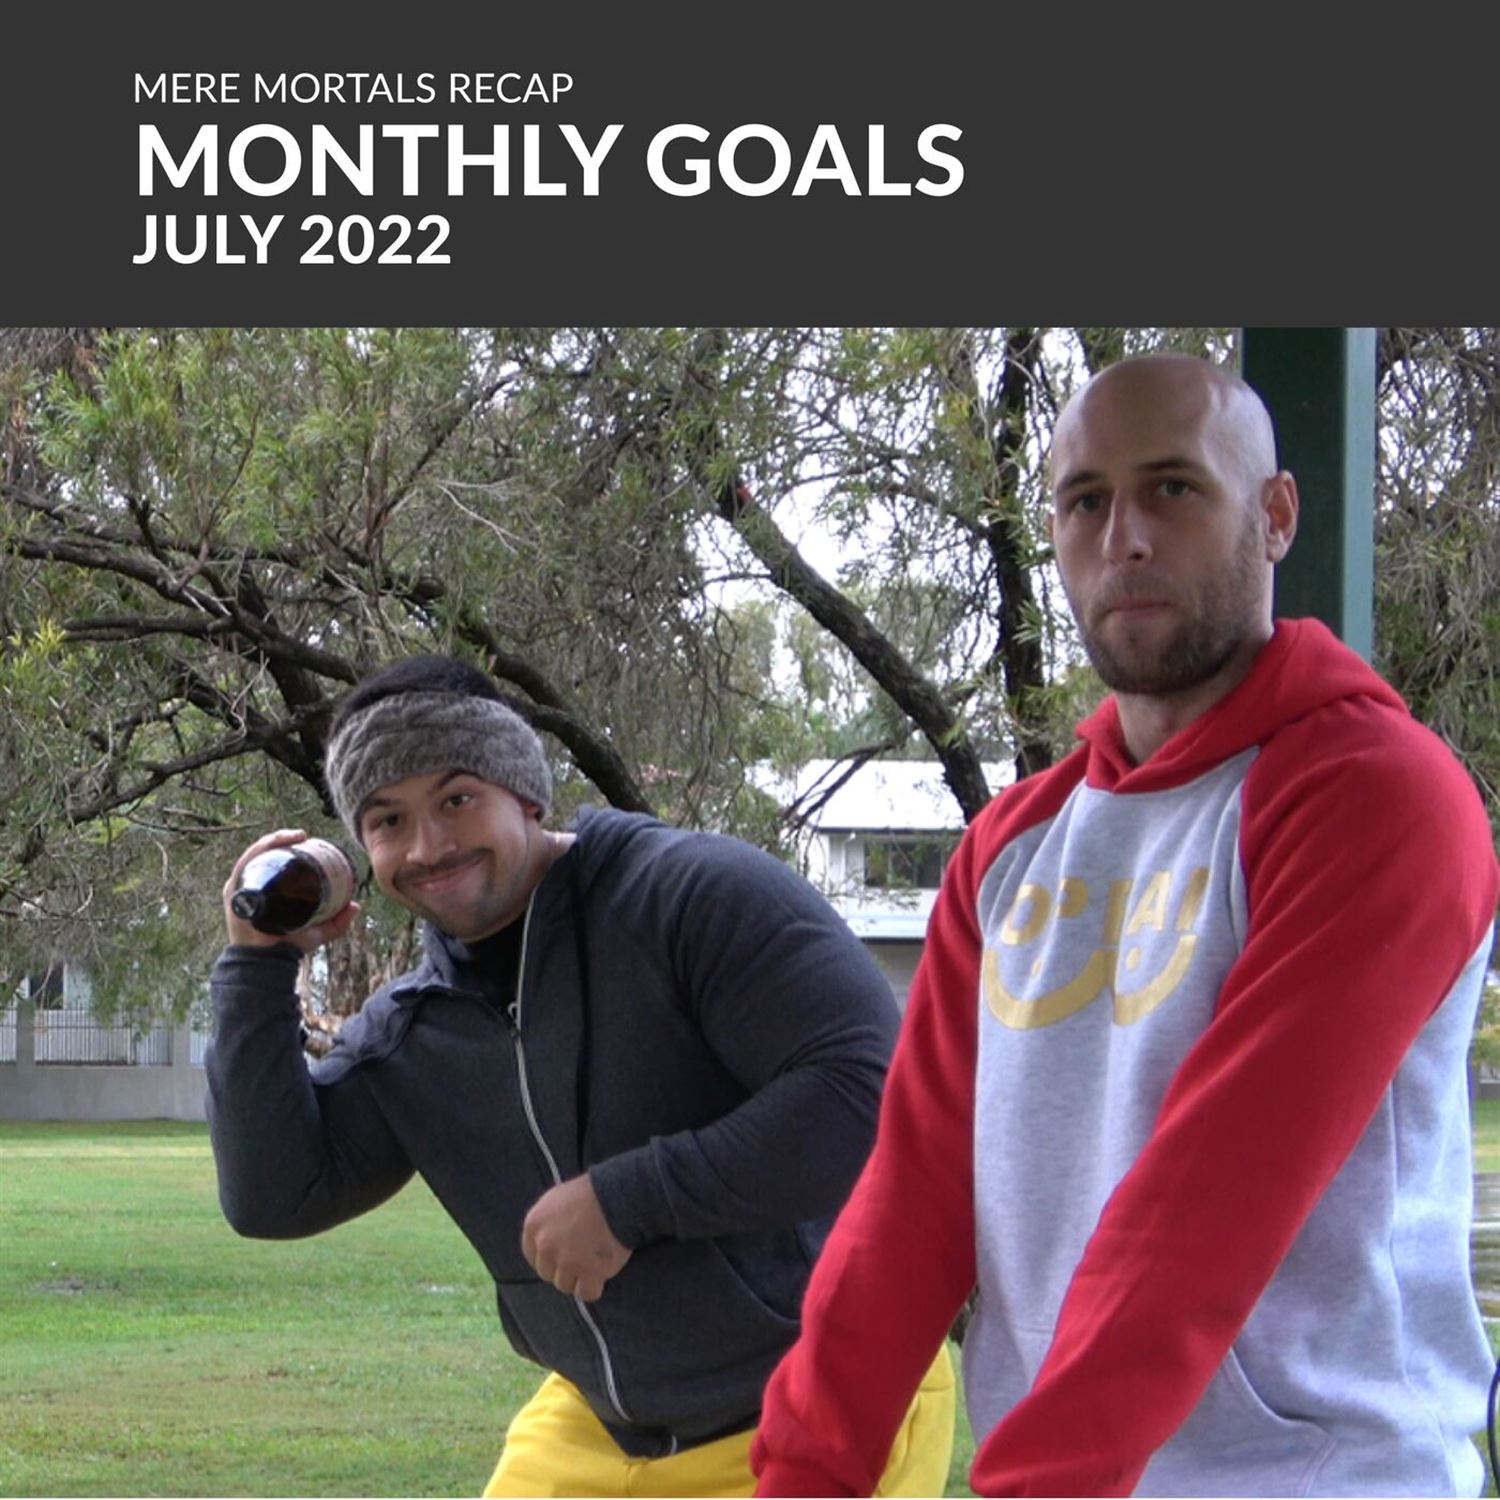 Monthly Goals - July 2022